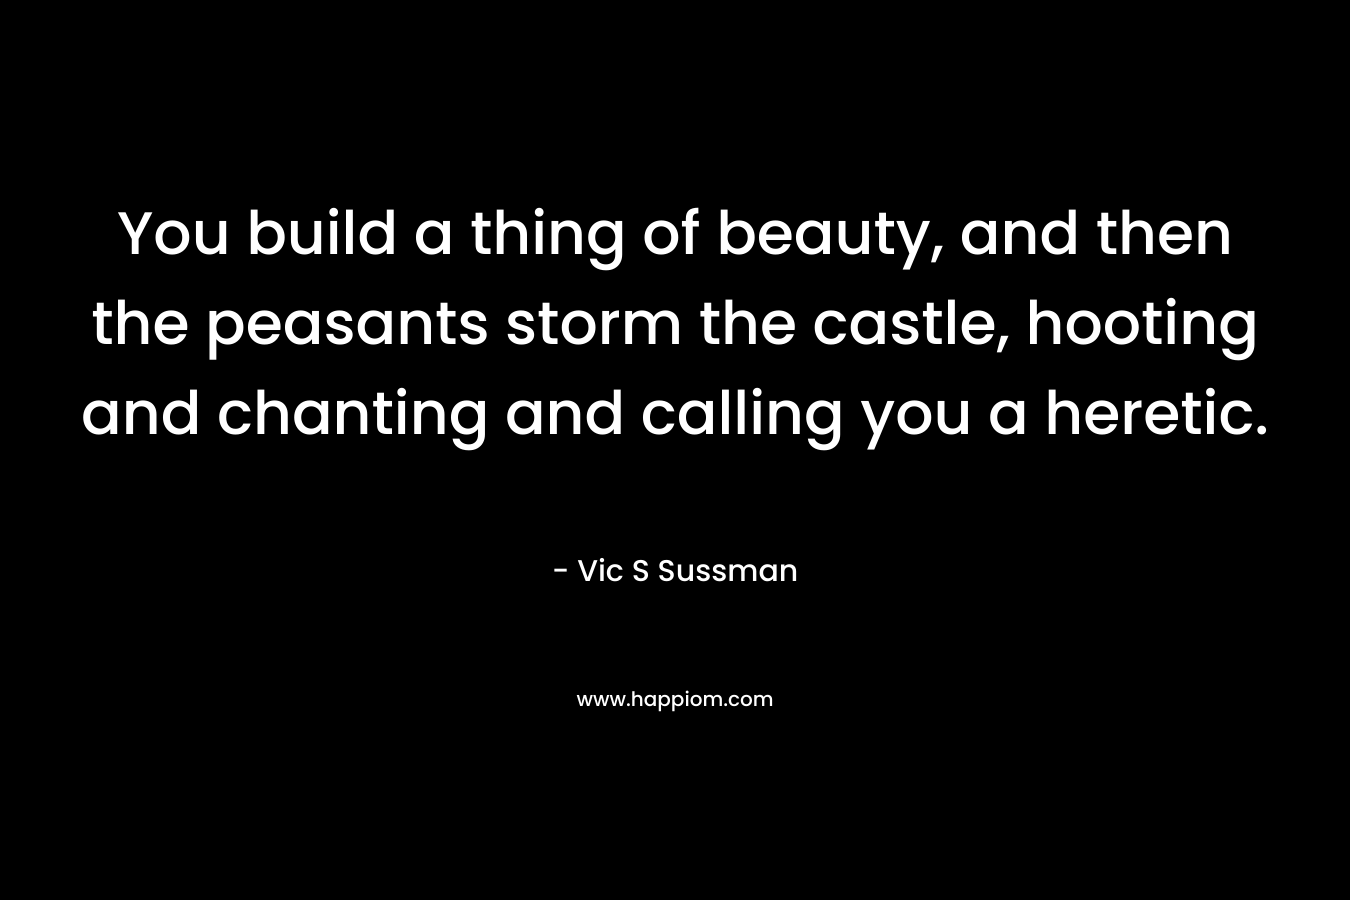 You build a thing of beauty, and then the peasants storm the castle, hooting and chanting and calling you a heretic. – Vic S Sussman